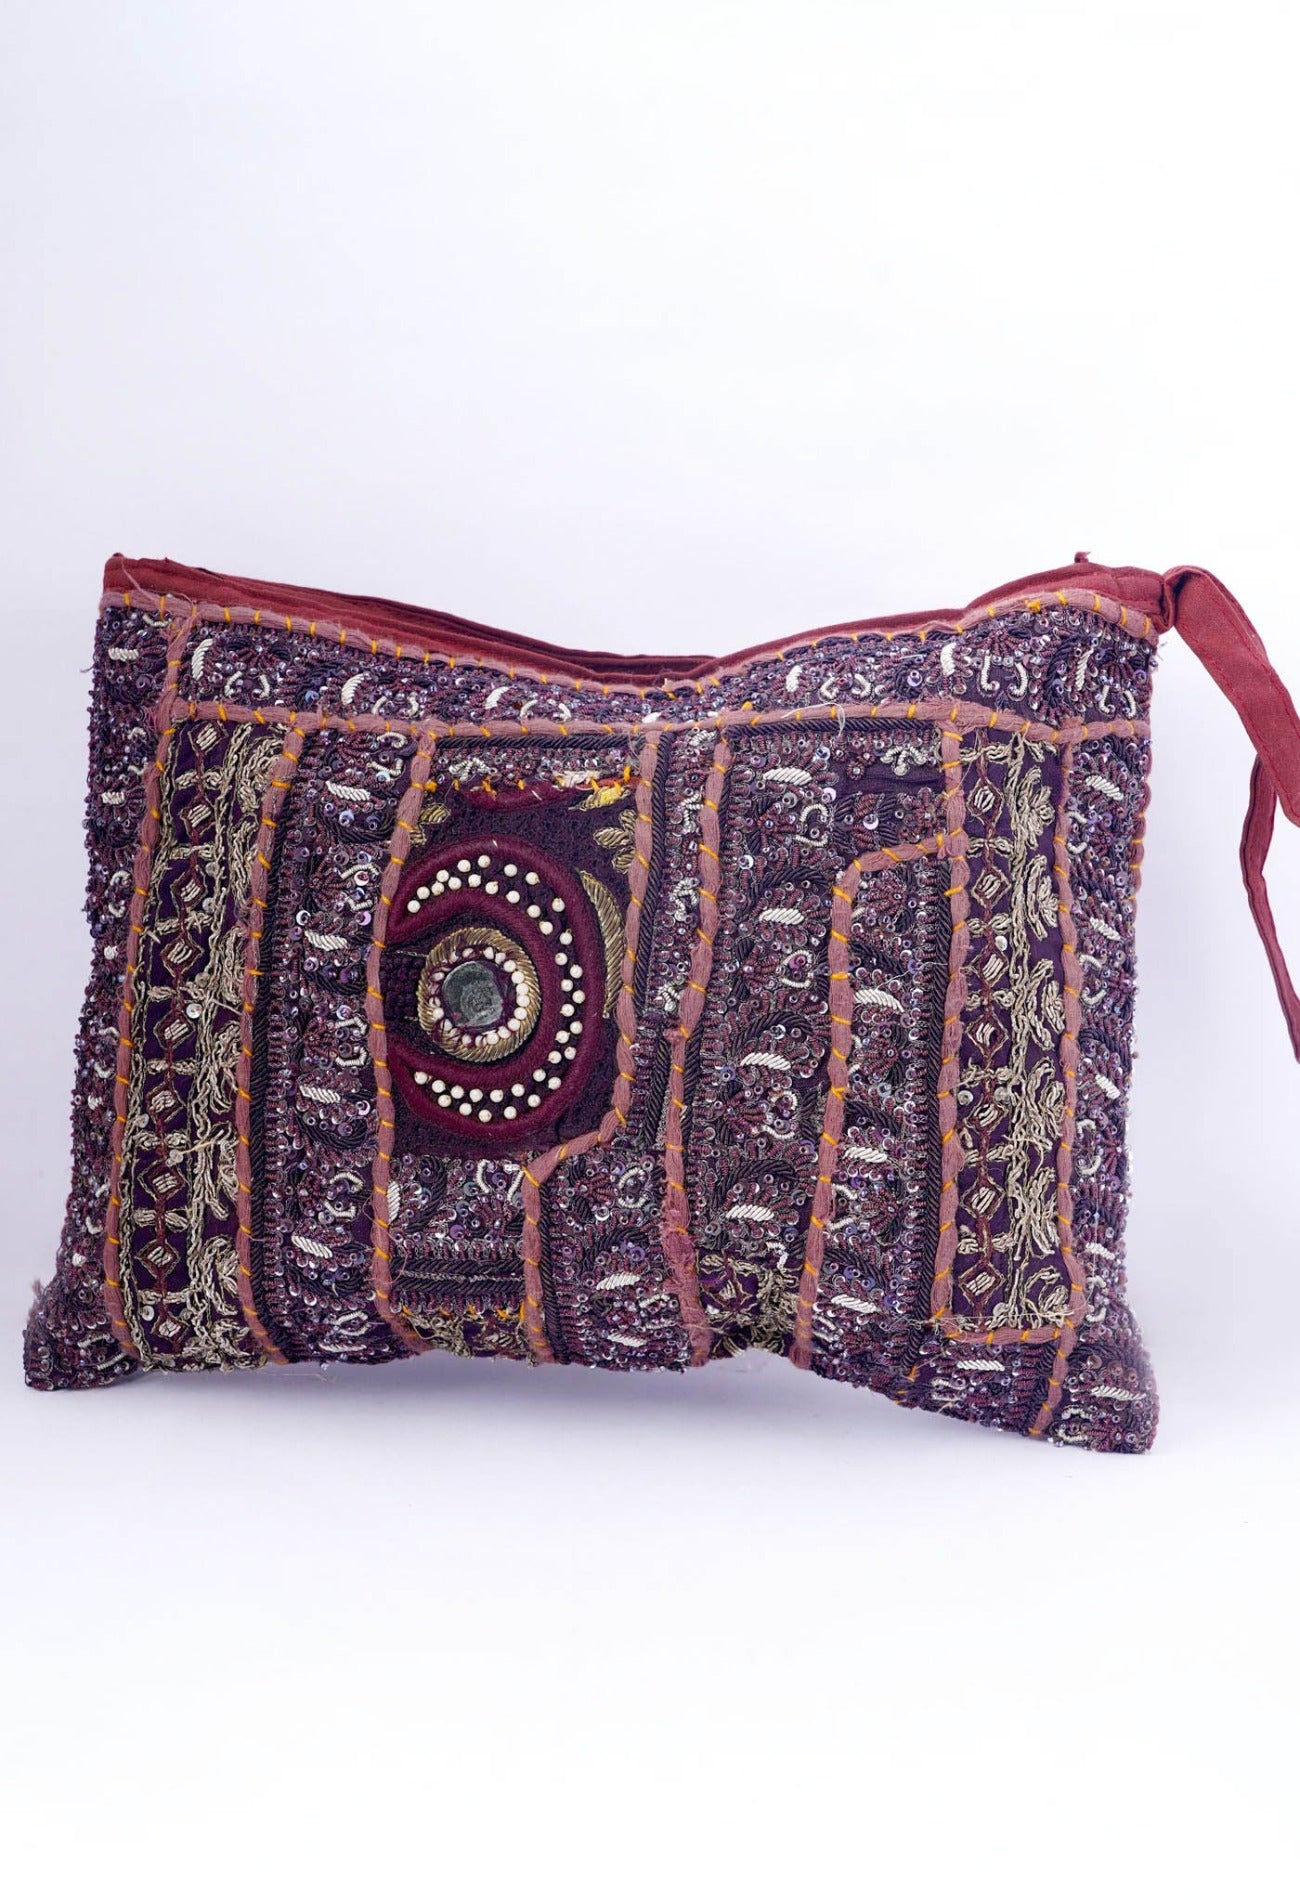 Online Shopping for Purple Indian Handicraft Embroidered Hand Bag with Weaving from Rajasthan at Unnatisilks.com India_x000D_
Online Shopping for Purple Indian Handicraft Embroidered Hand Bag with Weaving from Rajasthan at Unnatisilks.com India_x000D_
